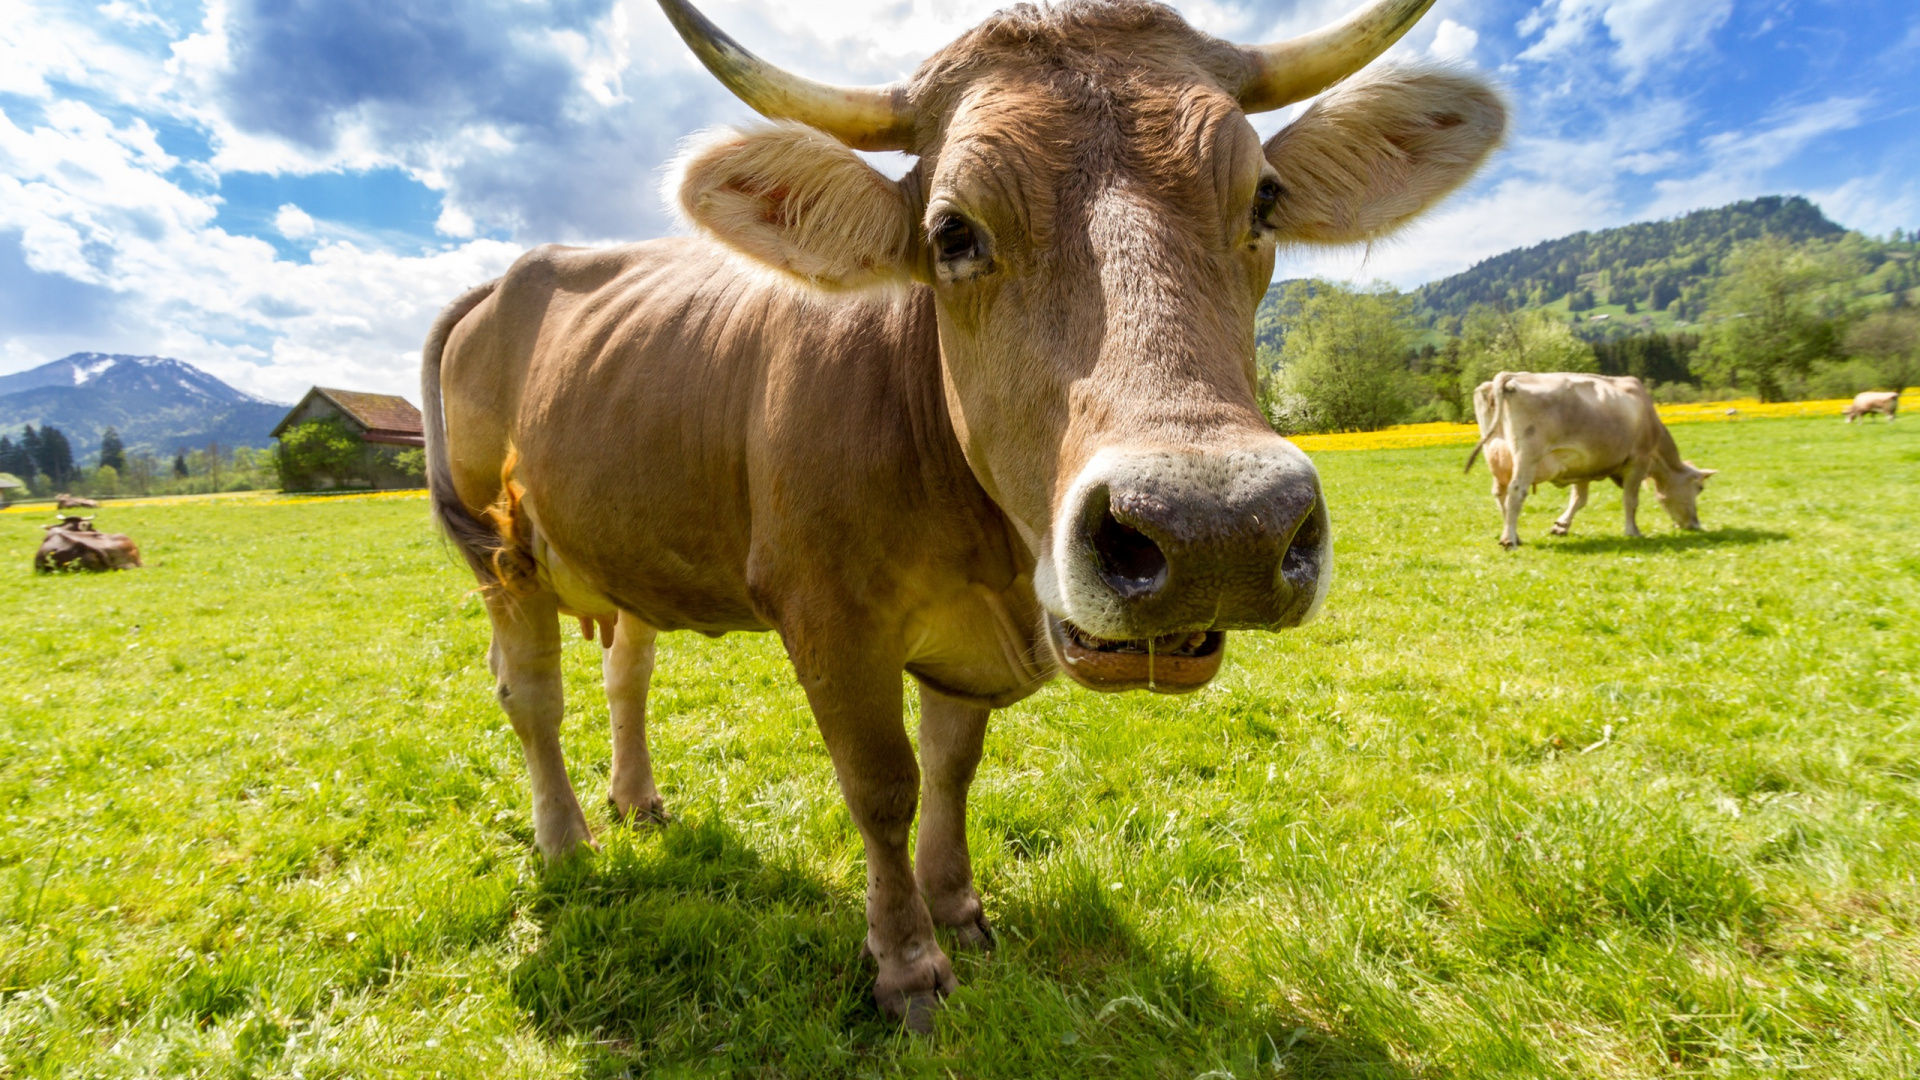 Brown Cow on Green Grass Field During Daytime. Wallpaper in 1920x1080 Resolution